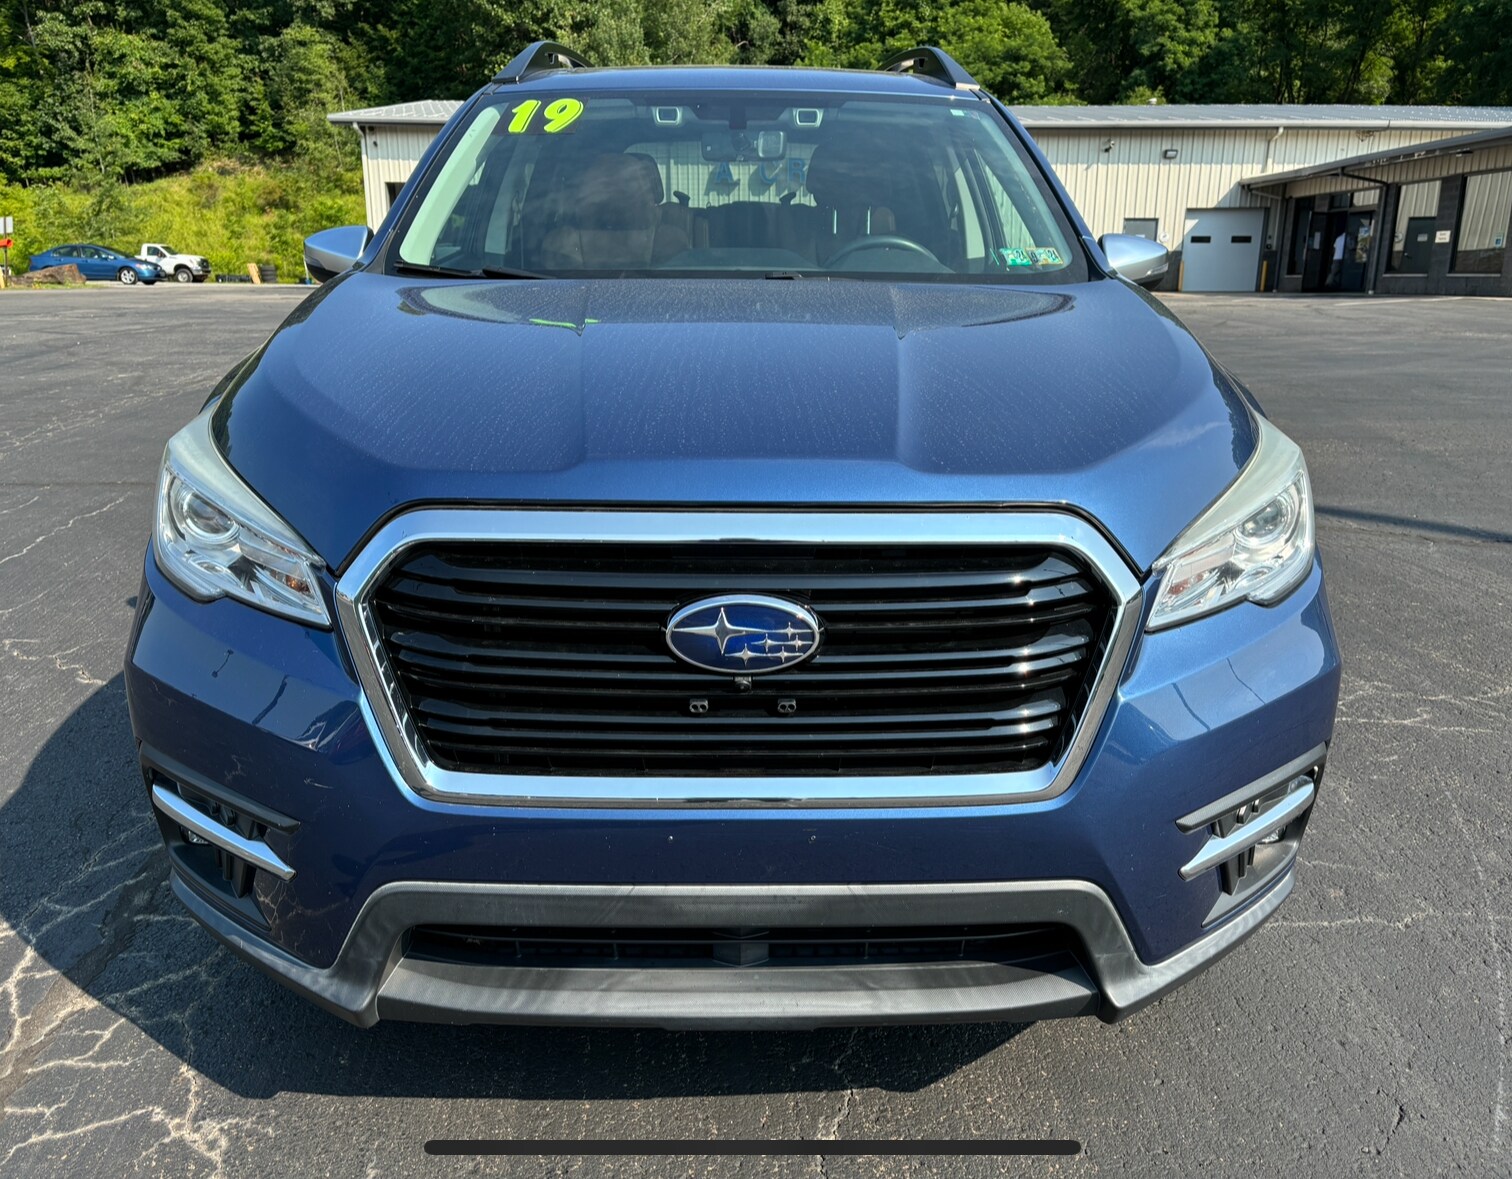 Used 2019 Subaru Ascent Touring with VIN 4S4WMARD6K3471724 for sale in Franklin, PA